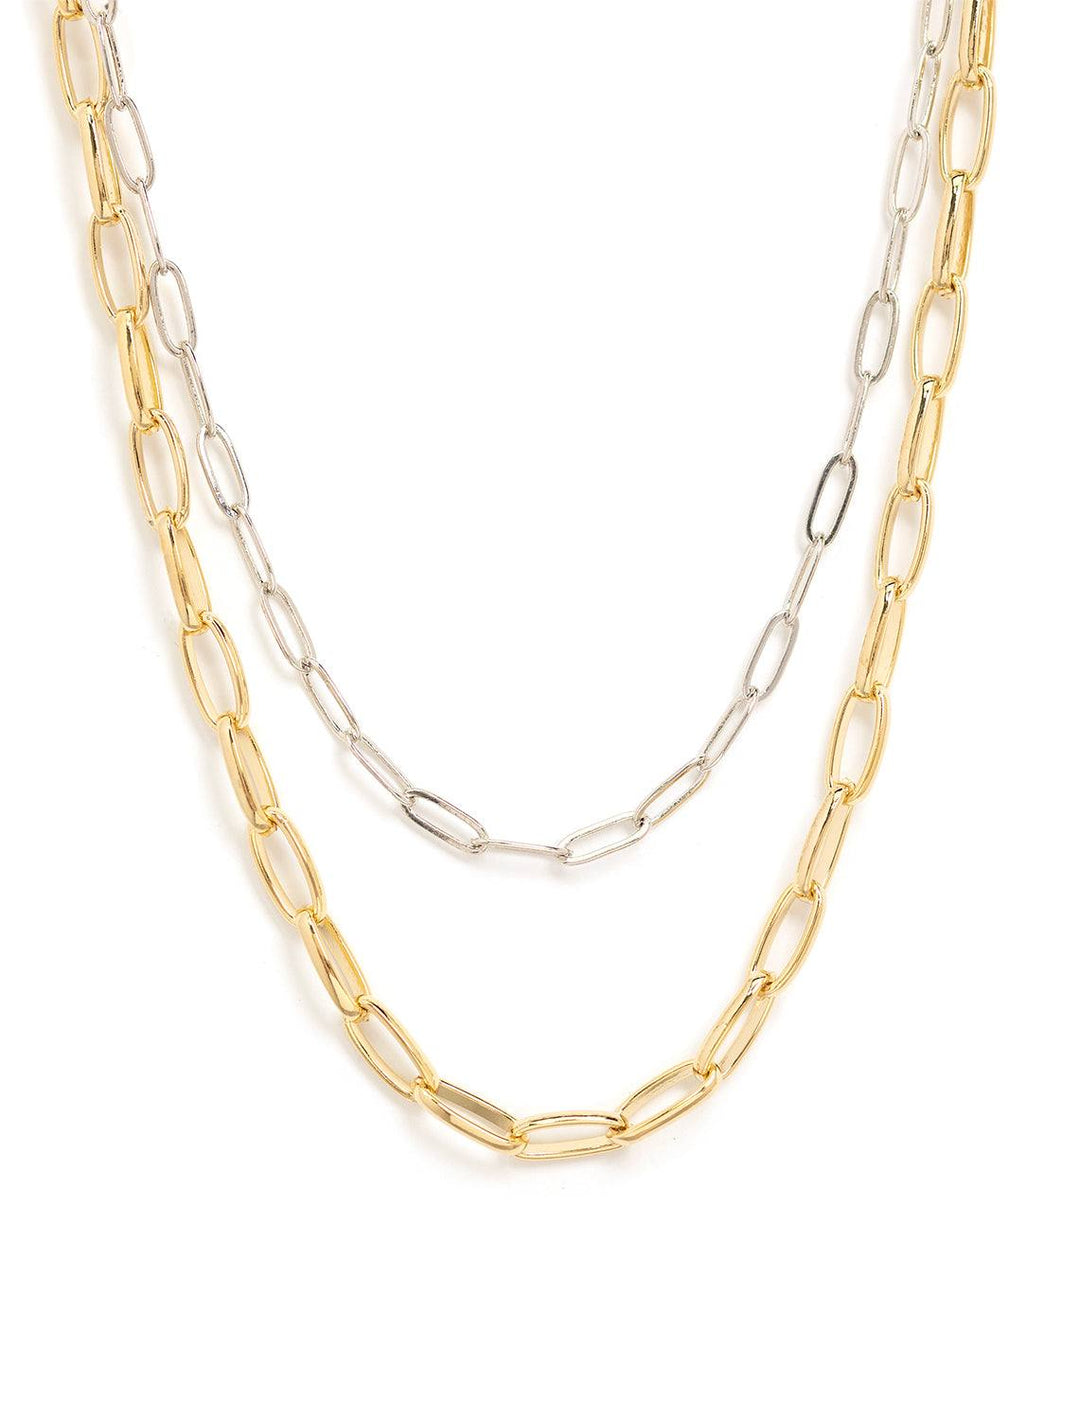 AV Max's two tone link necklace.